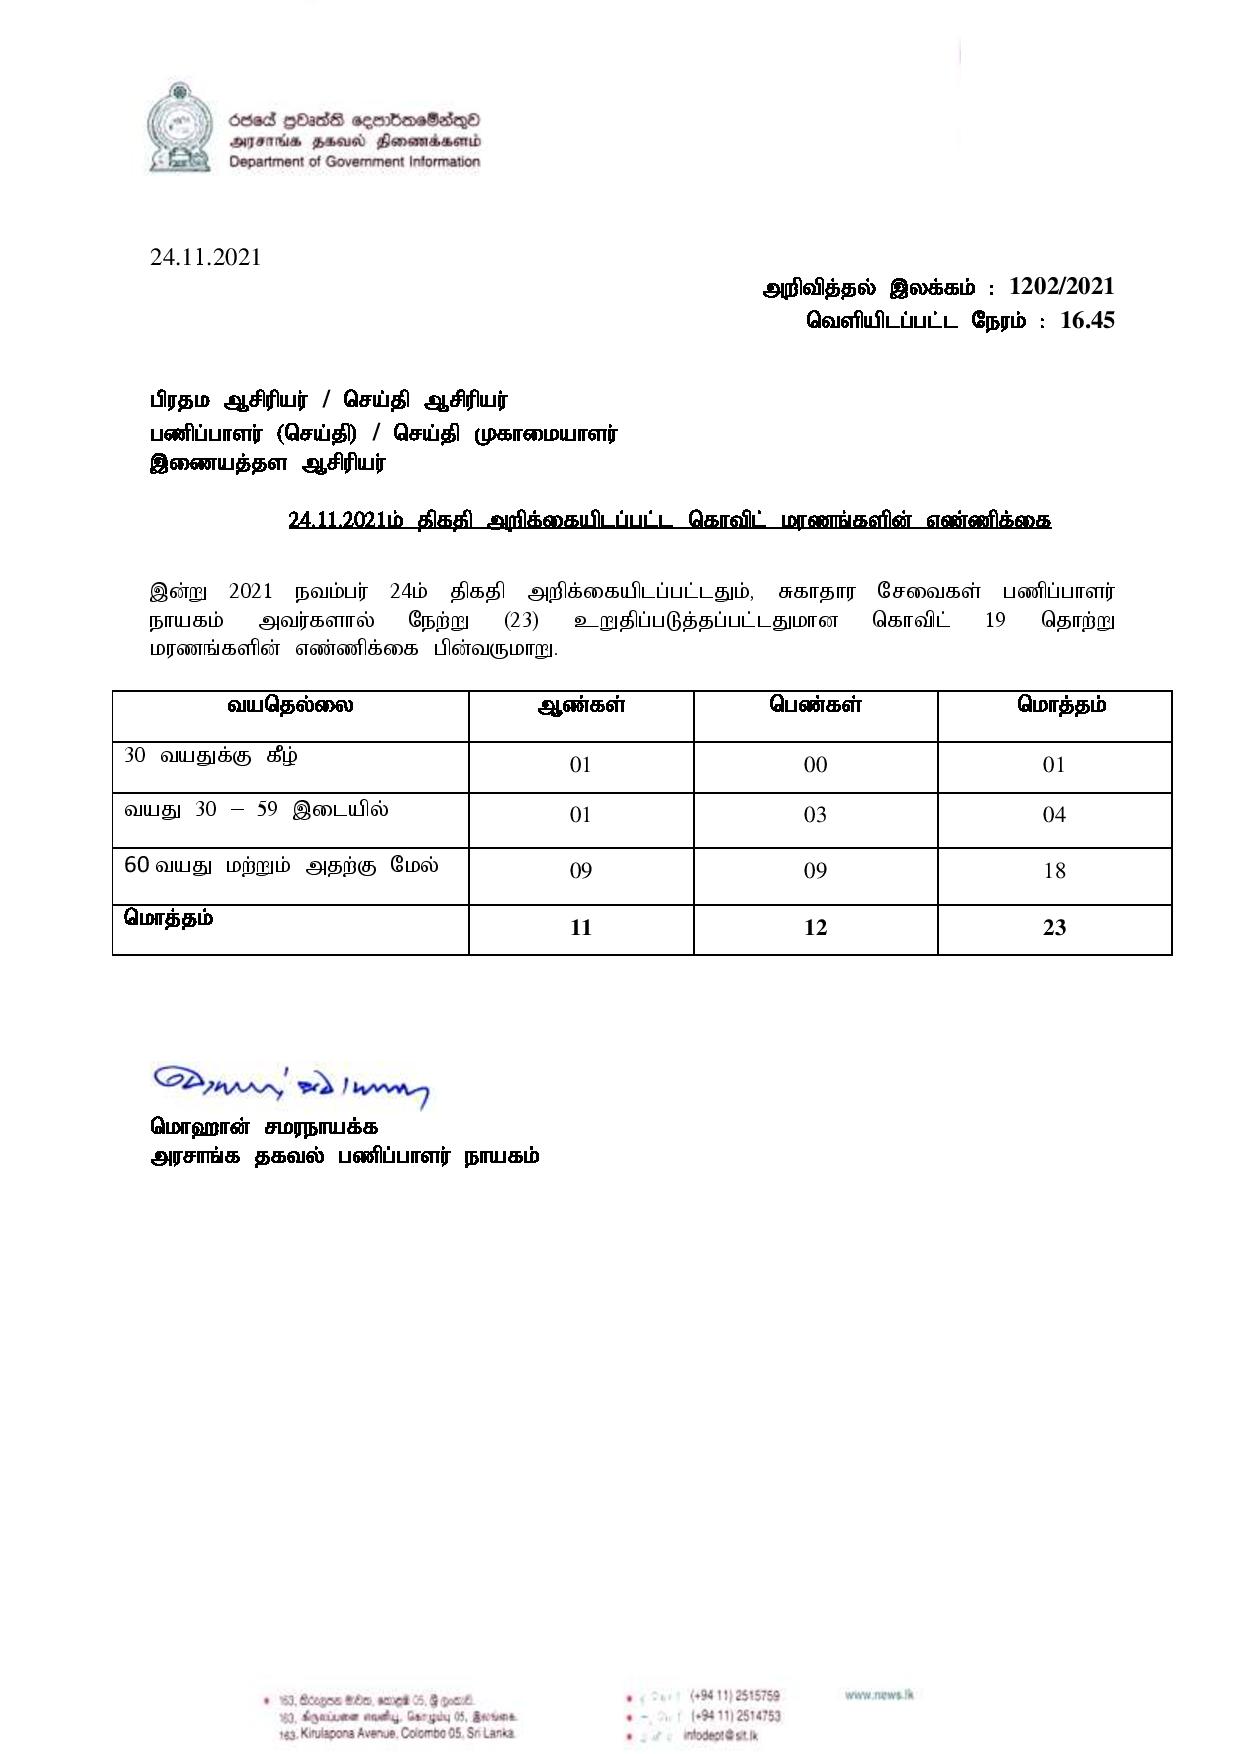 Release No 1202 Tamil page 001